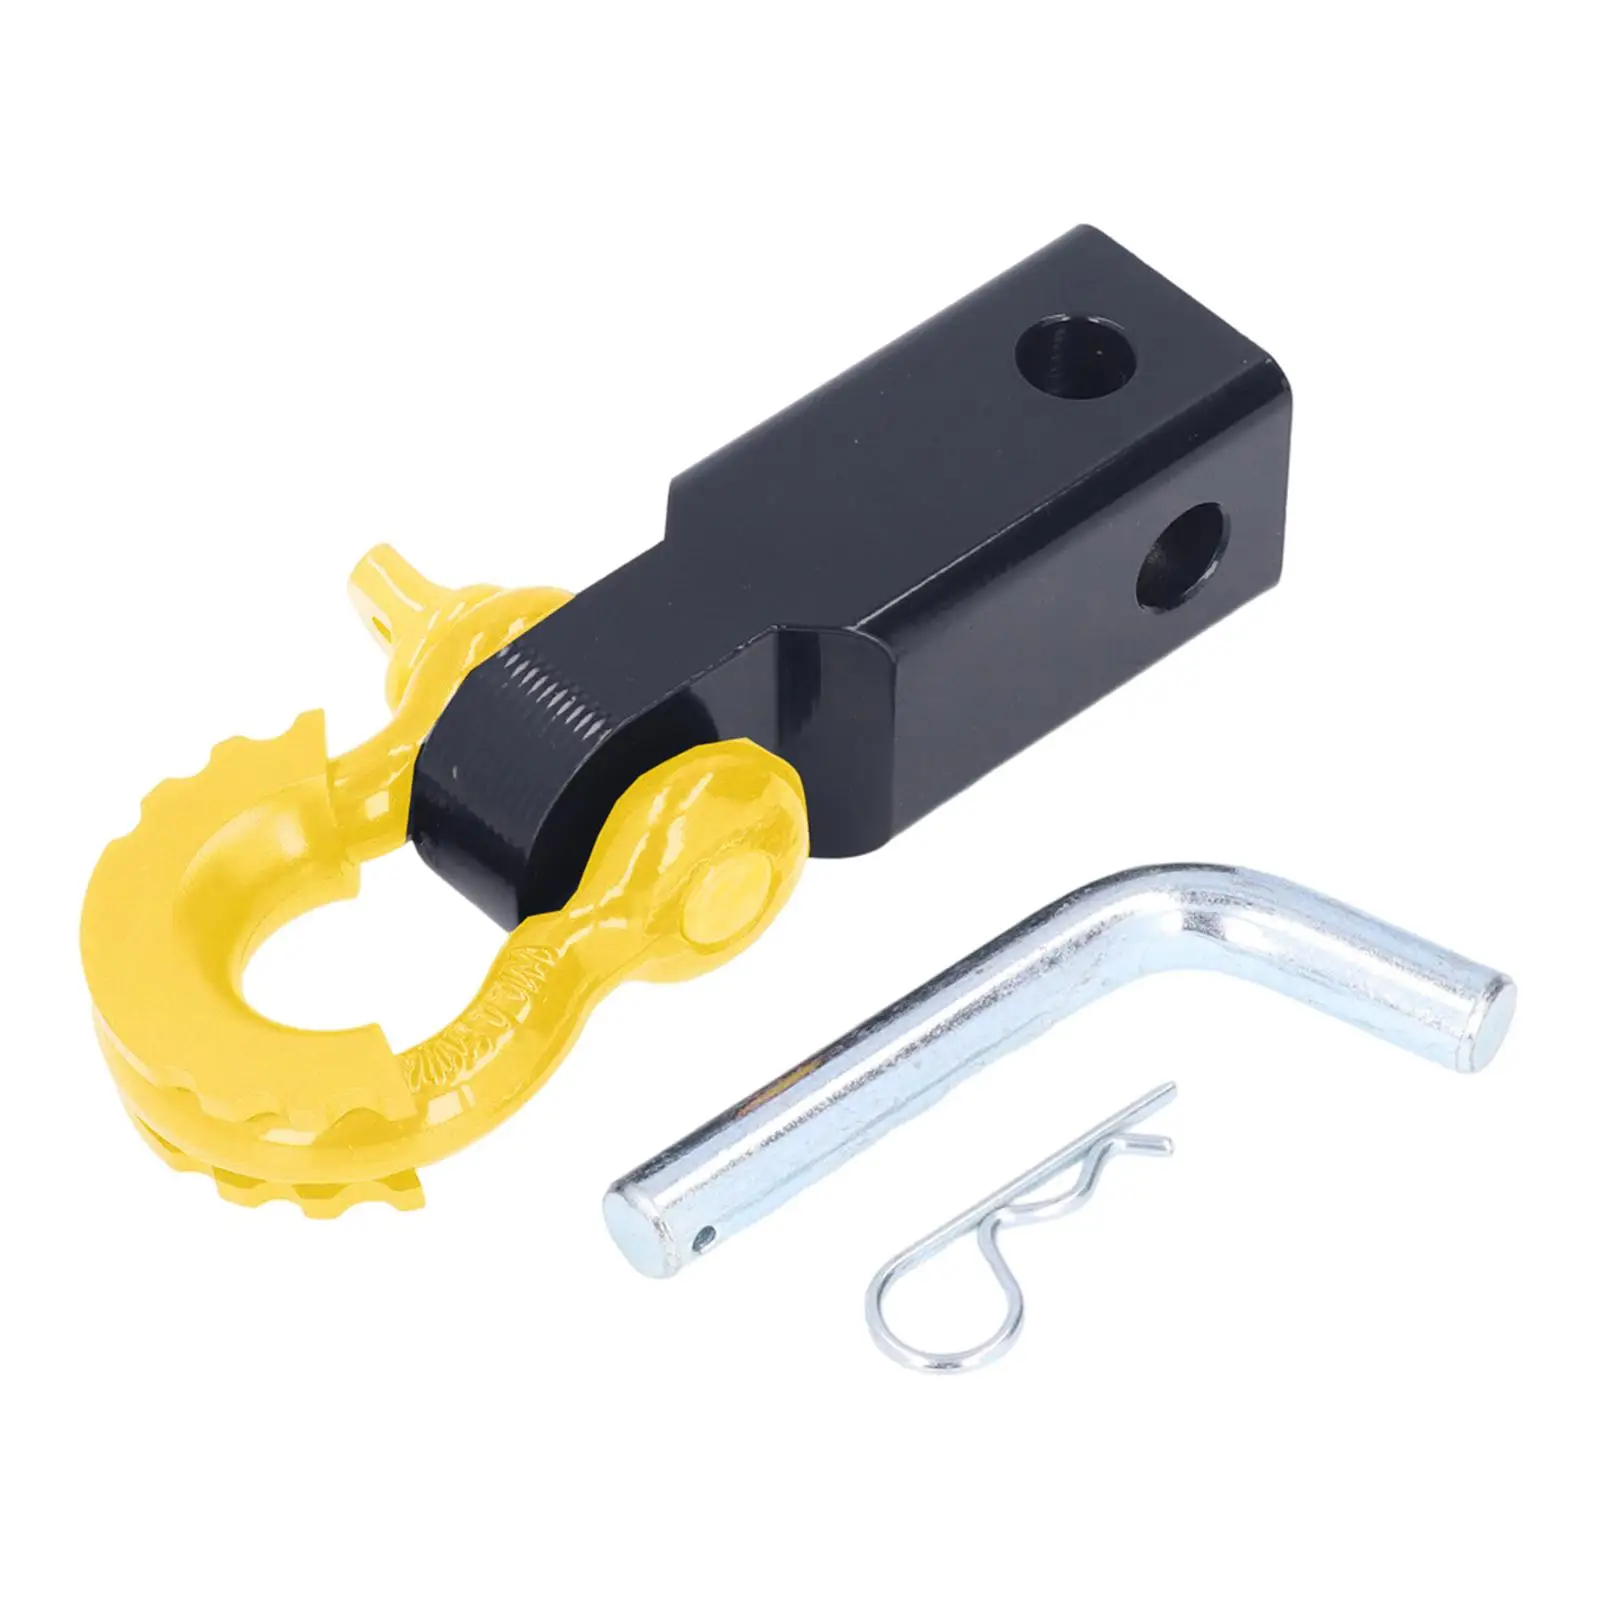 Shackle Hitch Receiver Spare Easy Using Heavy Duty Block Professional Attachments with Connector for SUV Vehicle